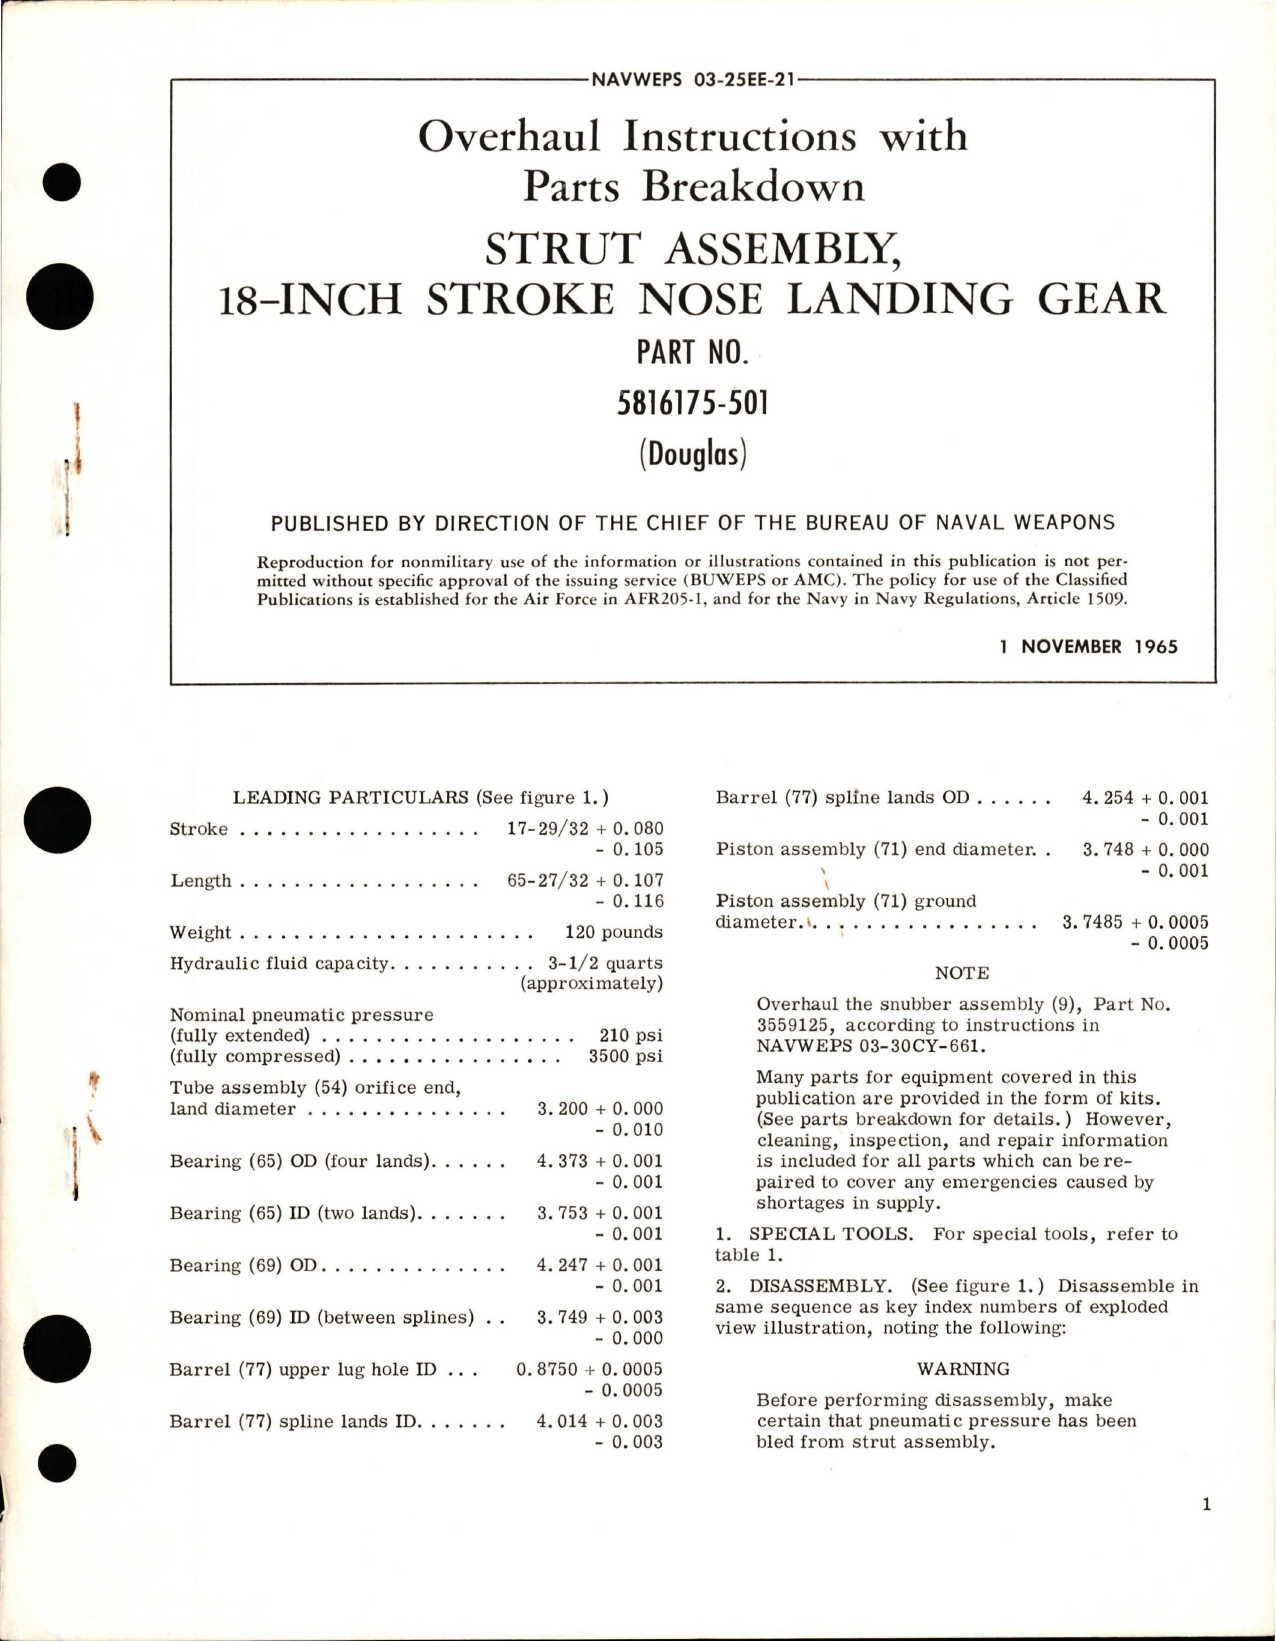 Sample page 1 from AirCorps Library document: Overhaul Instructions with Parts Breakdown for 18-Inch Stroke Nose Landing Gear Strut Assembly - Part 5816175-501